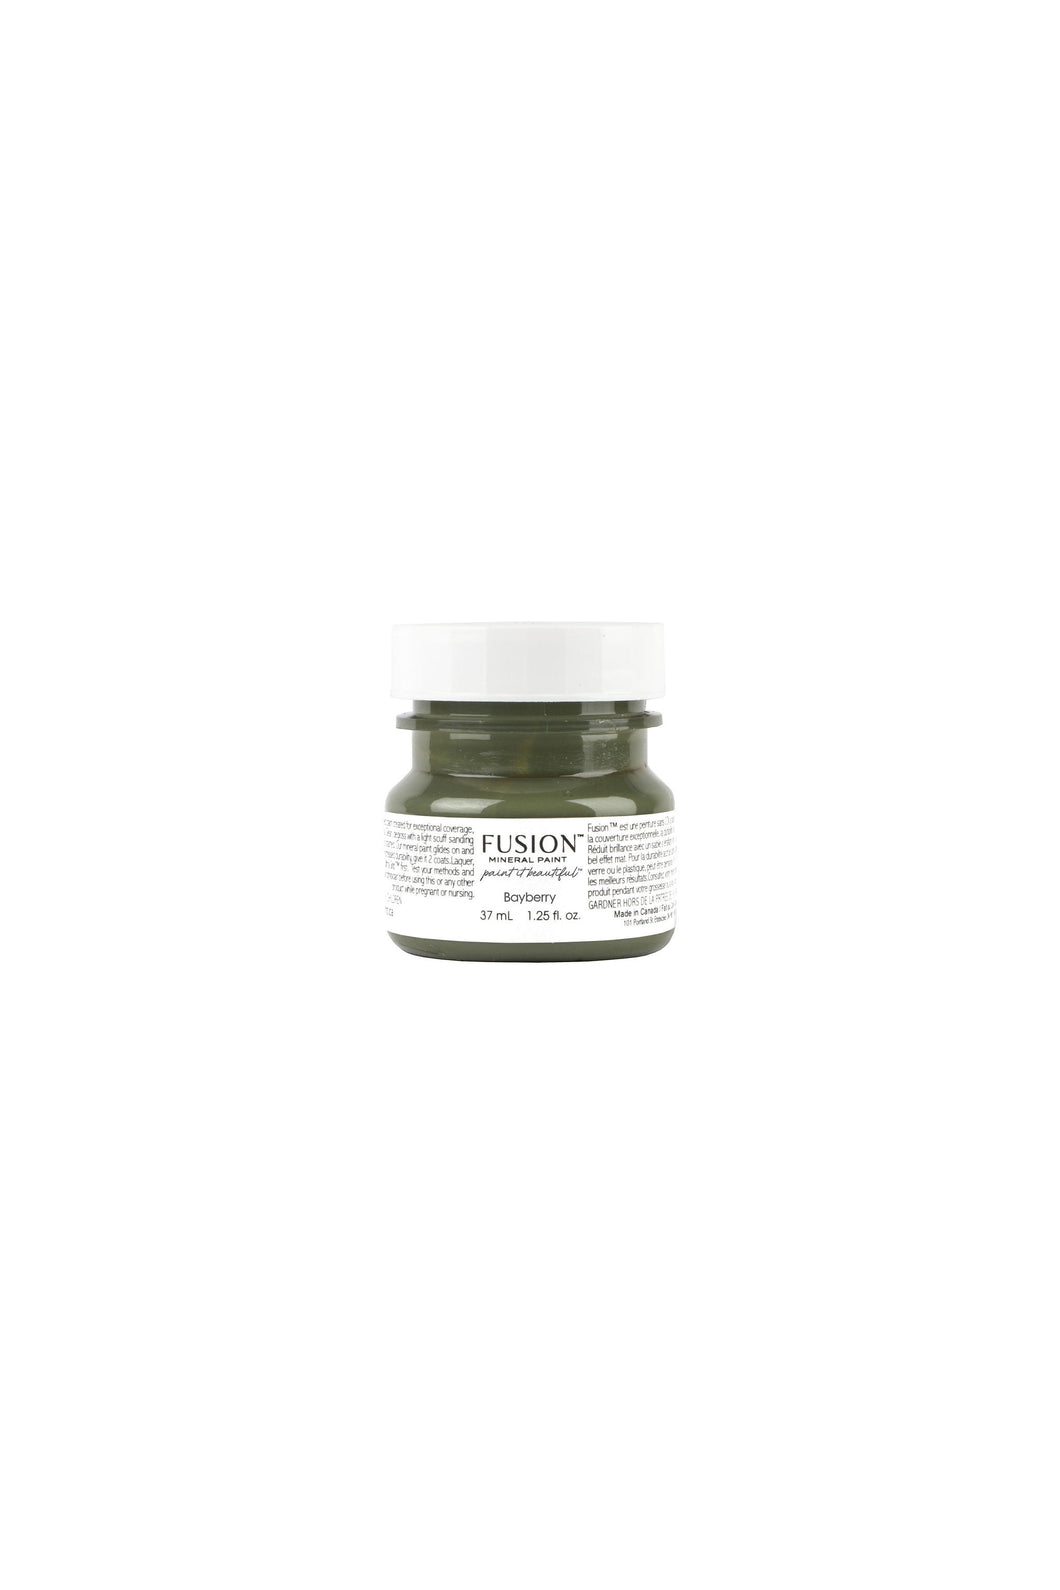 Fusion Mineral Paint - Bayberry 37 ml Jar